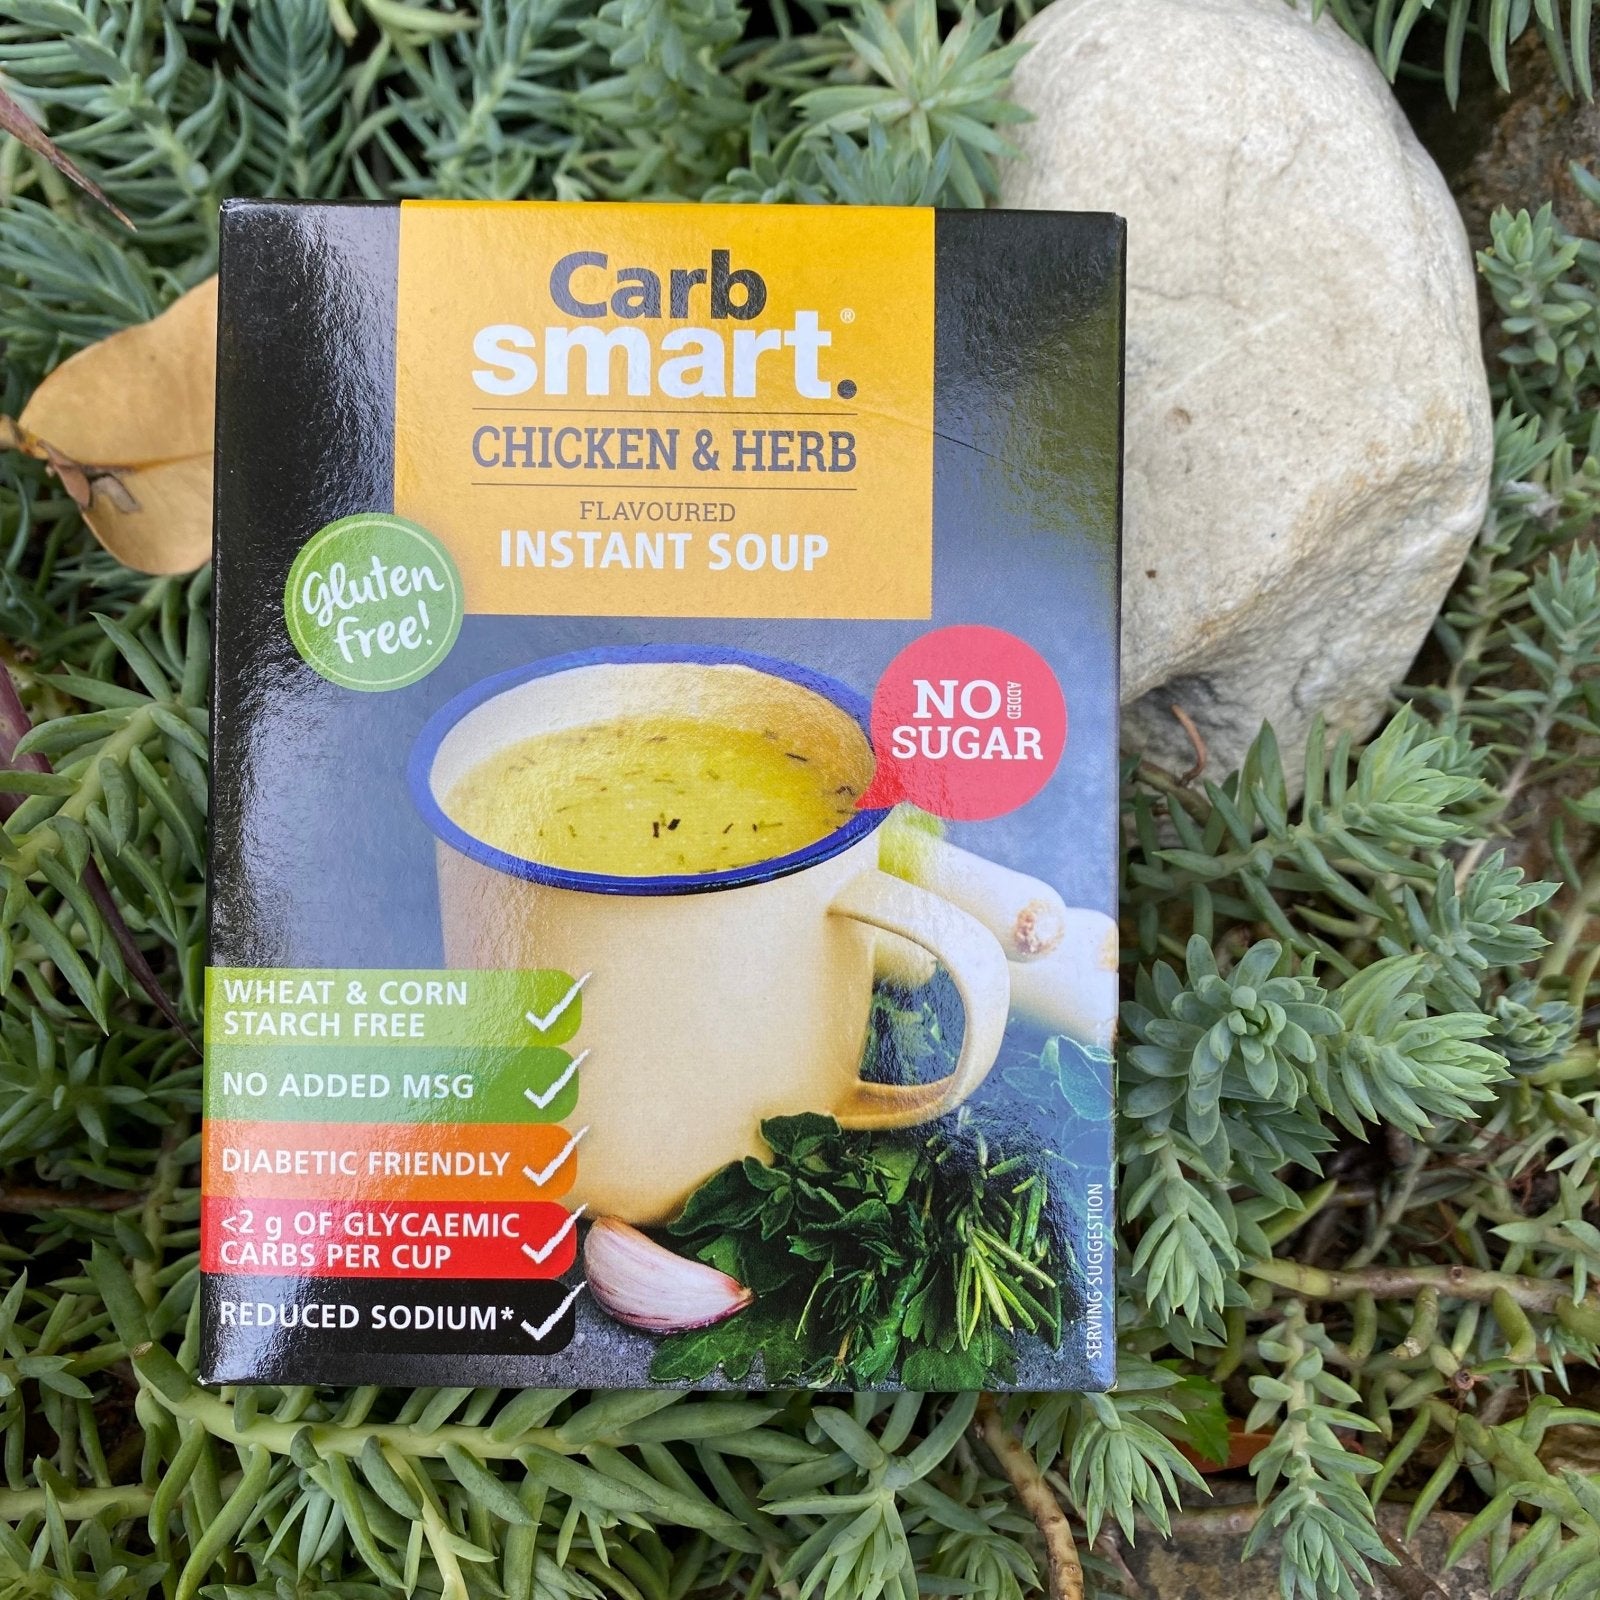 Carb Smart Chicken & Herb Instant Soup (4x17g) - The Deli